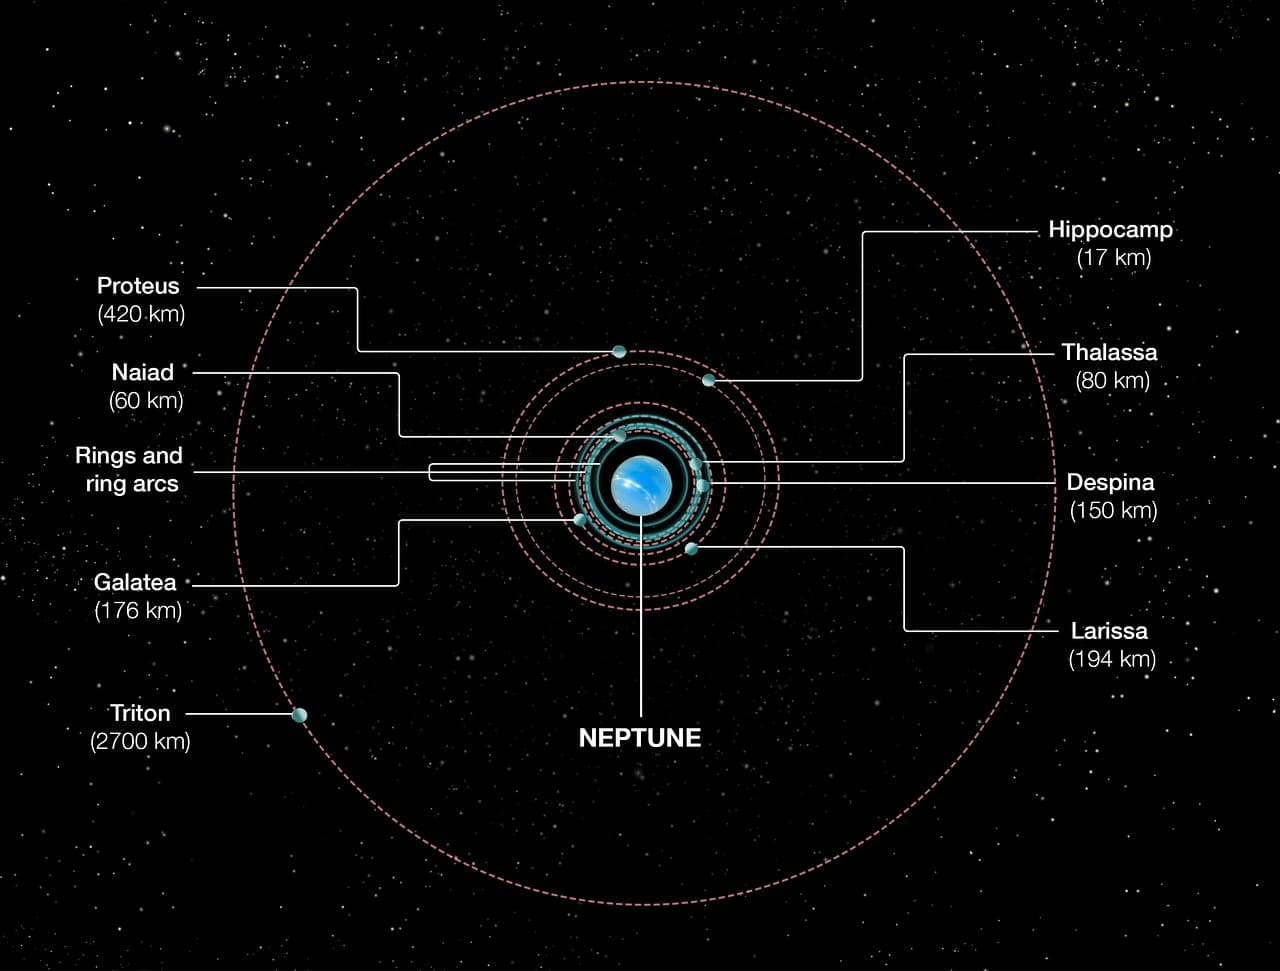 This diagram shows the orbital positions of Neptune’s inner moons, which range in size from 17 to 420 kilometres in diameter. The outer moon Triton was captured from the Kuiper belt many billions of years ago. This tore apart Neptune’s original satellite system. After Triton settled into a circular orbit the debris from shattered moons re-coalesced into the second generation of inner satellites seen today. However, comet bombardment continued, leading to the birth of Hippocamp, which is a broken-off piece of Proteus. Therefore, Hippocamp is considered to be a third-generation satellite. Neither the size of the moons and Neptune, nor the orbits are to scale.